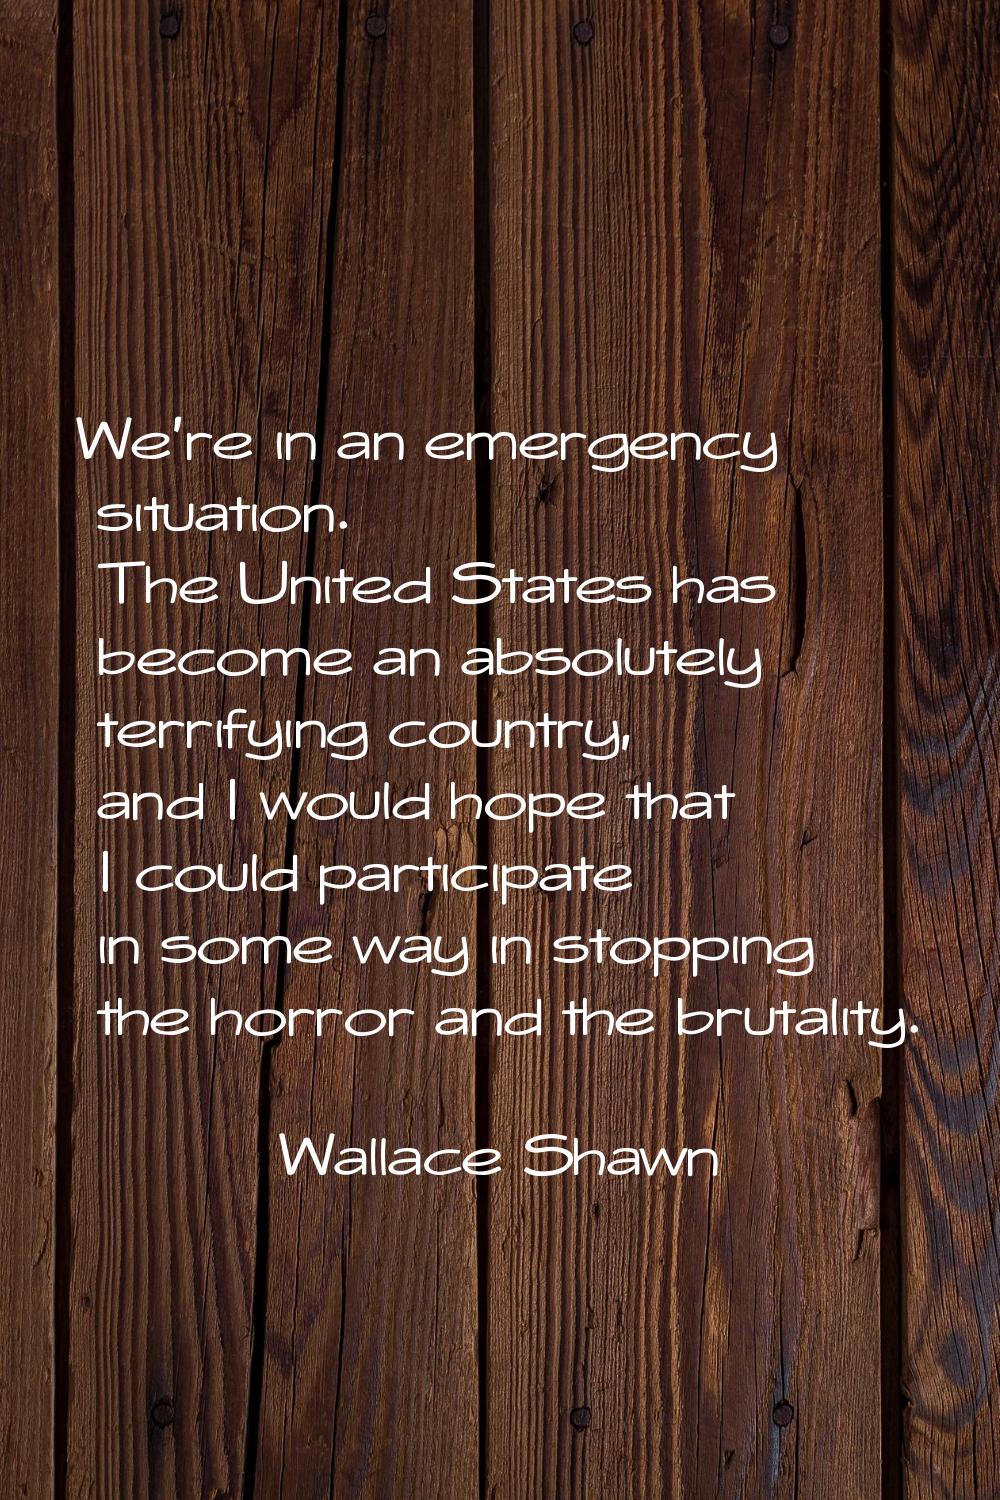 We're in an emergency situation. The United States has become an absolutely terrifying country, and